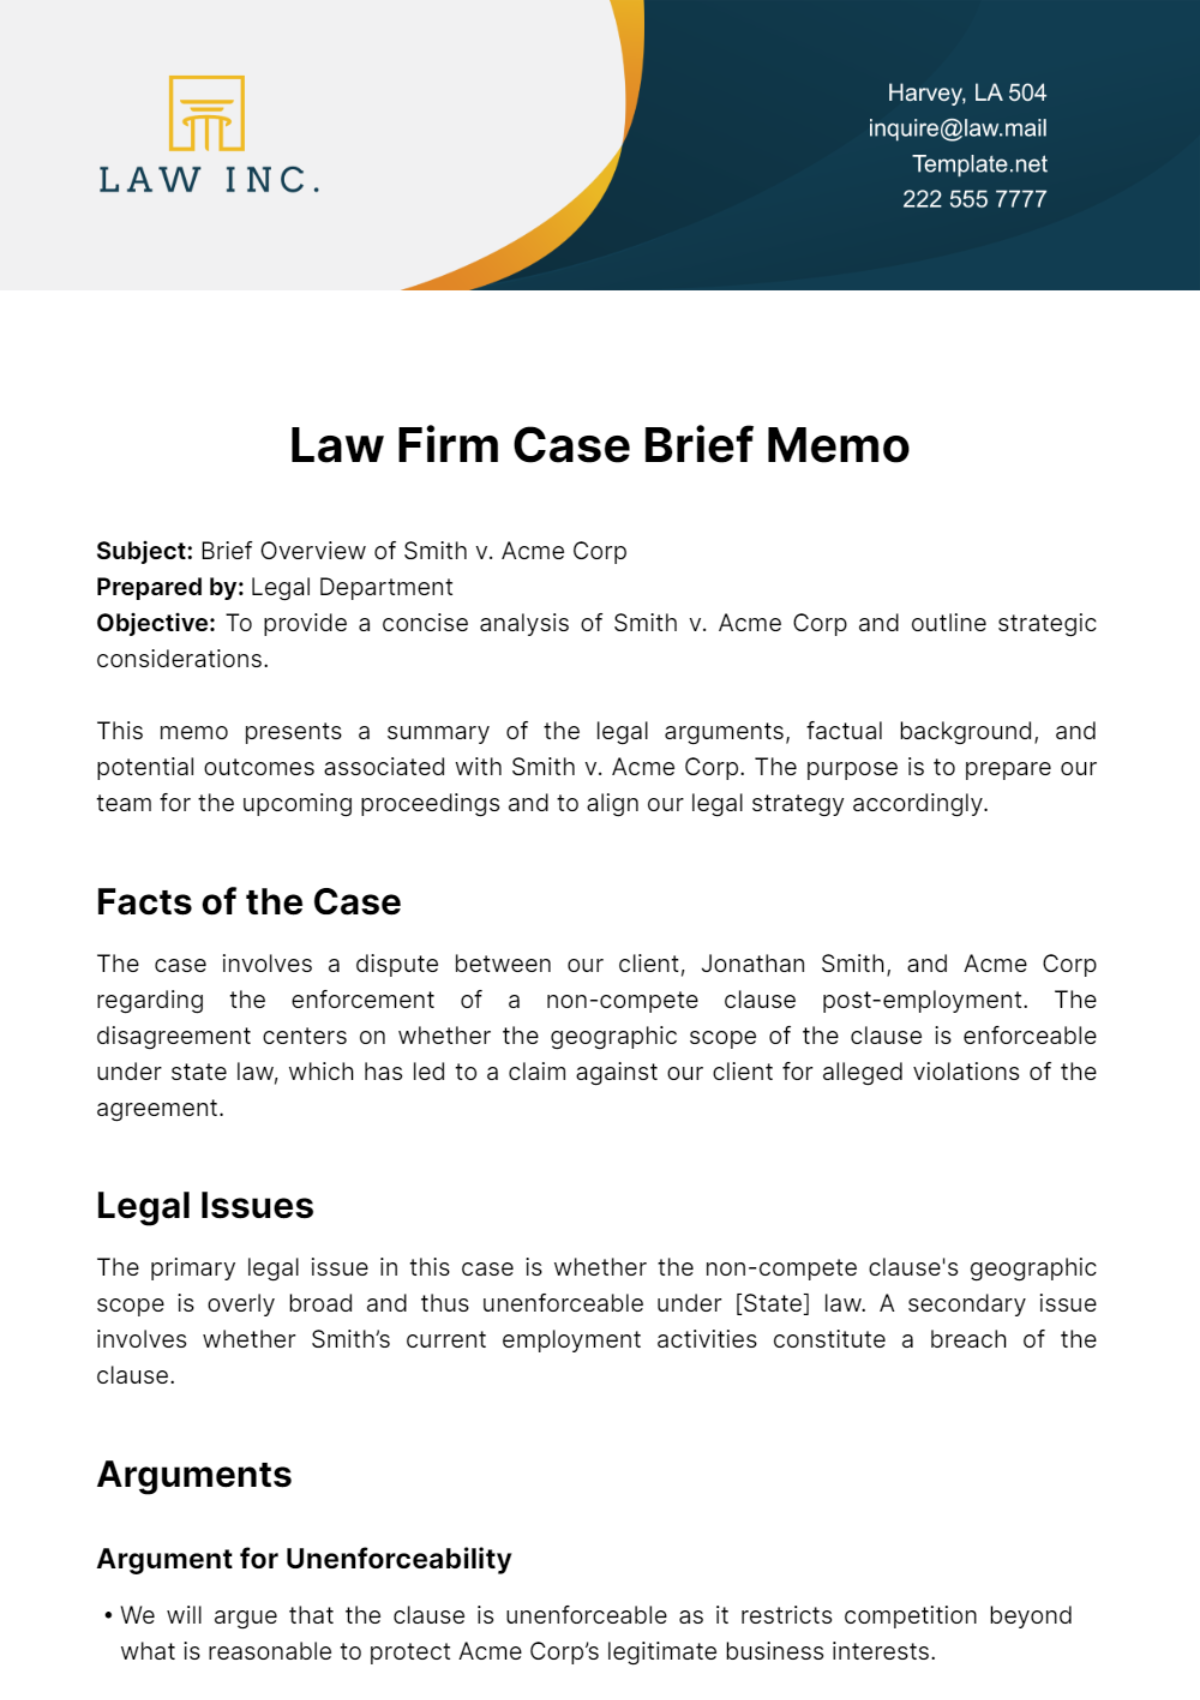 Free Law Firm Case Brief Memo Template